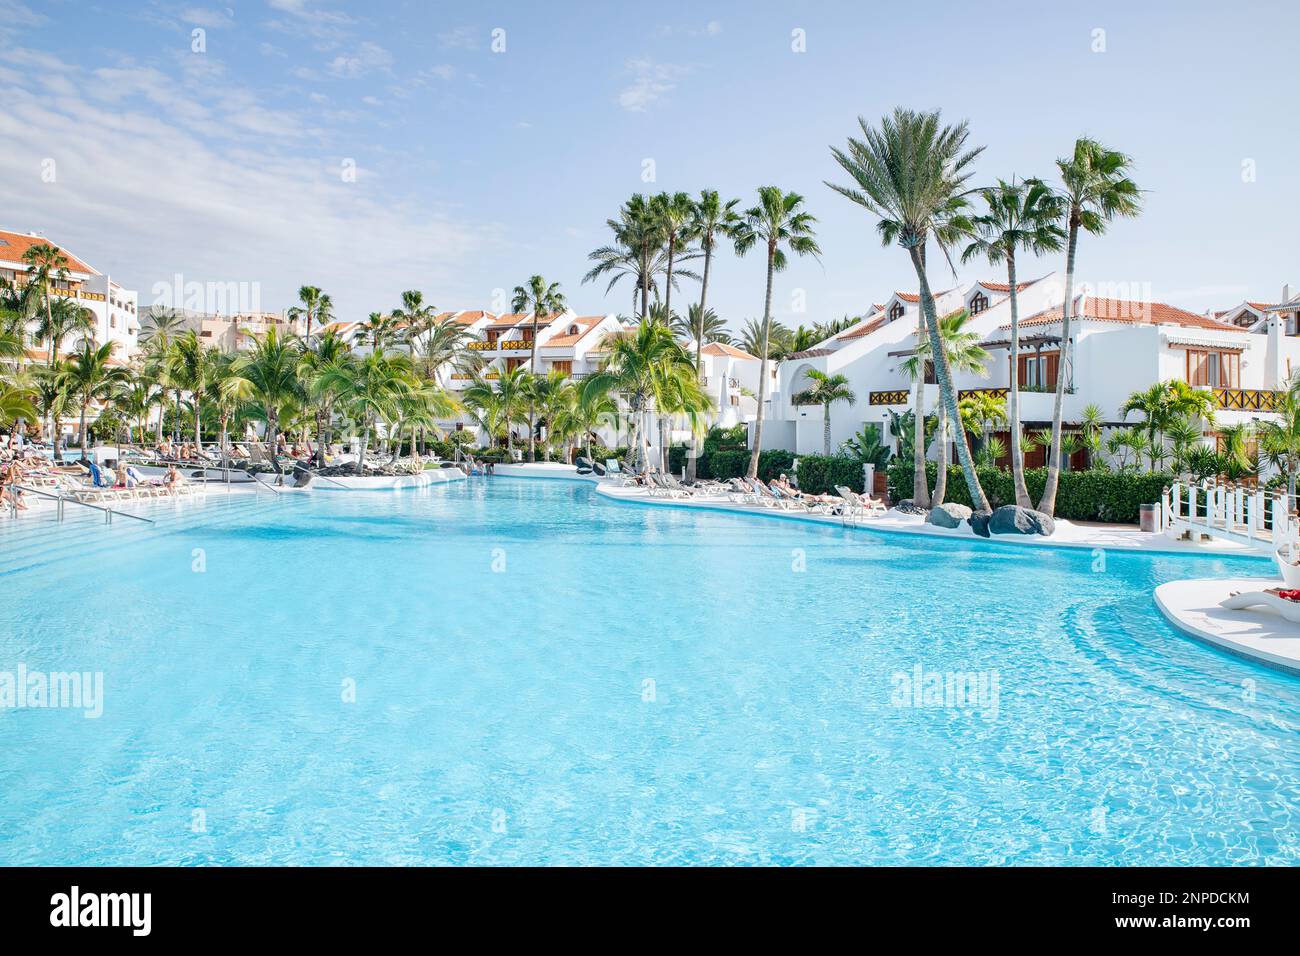 Tropical swimming pool surrounded by tall palm trees and enjoyed by tourists relaxing on sunbeds at Hotel Parque Santiago III, Playa de las Americas Stock Photo